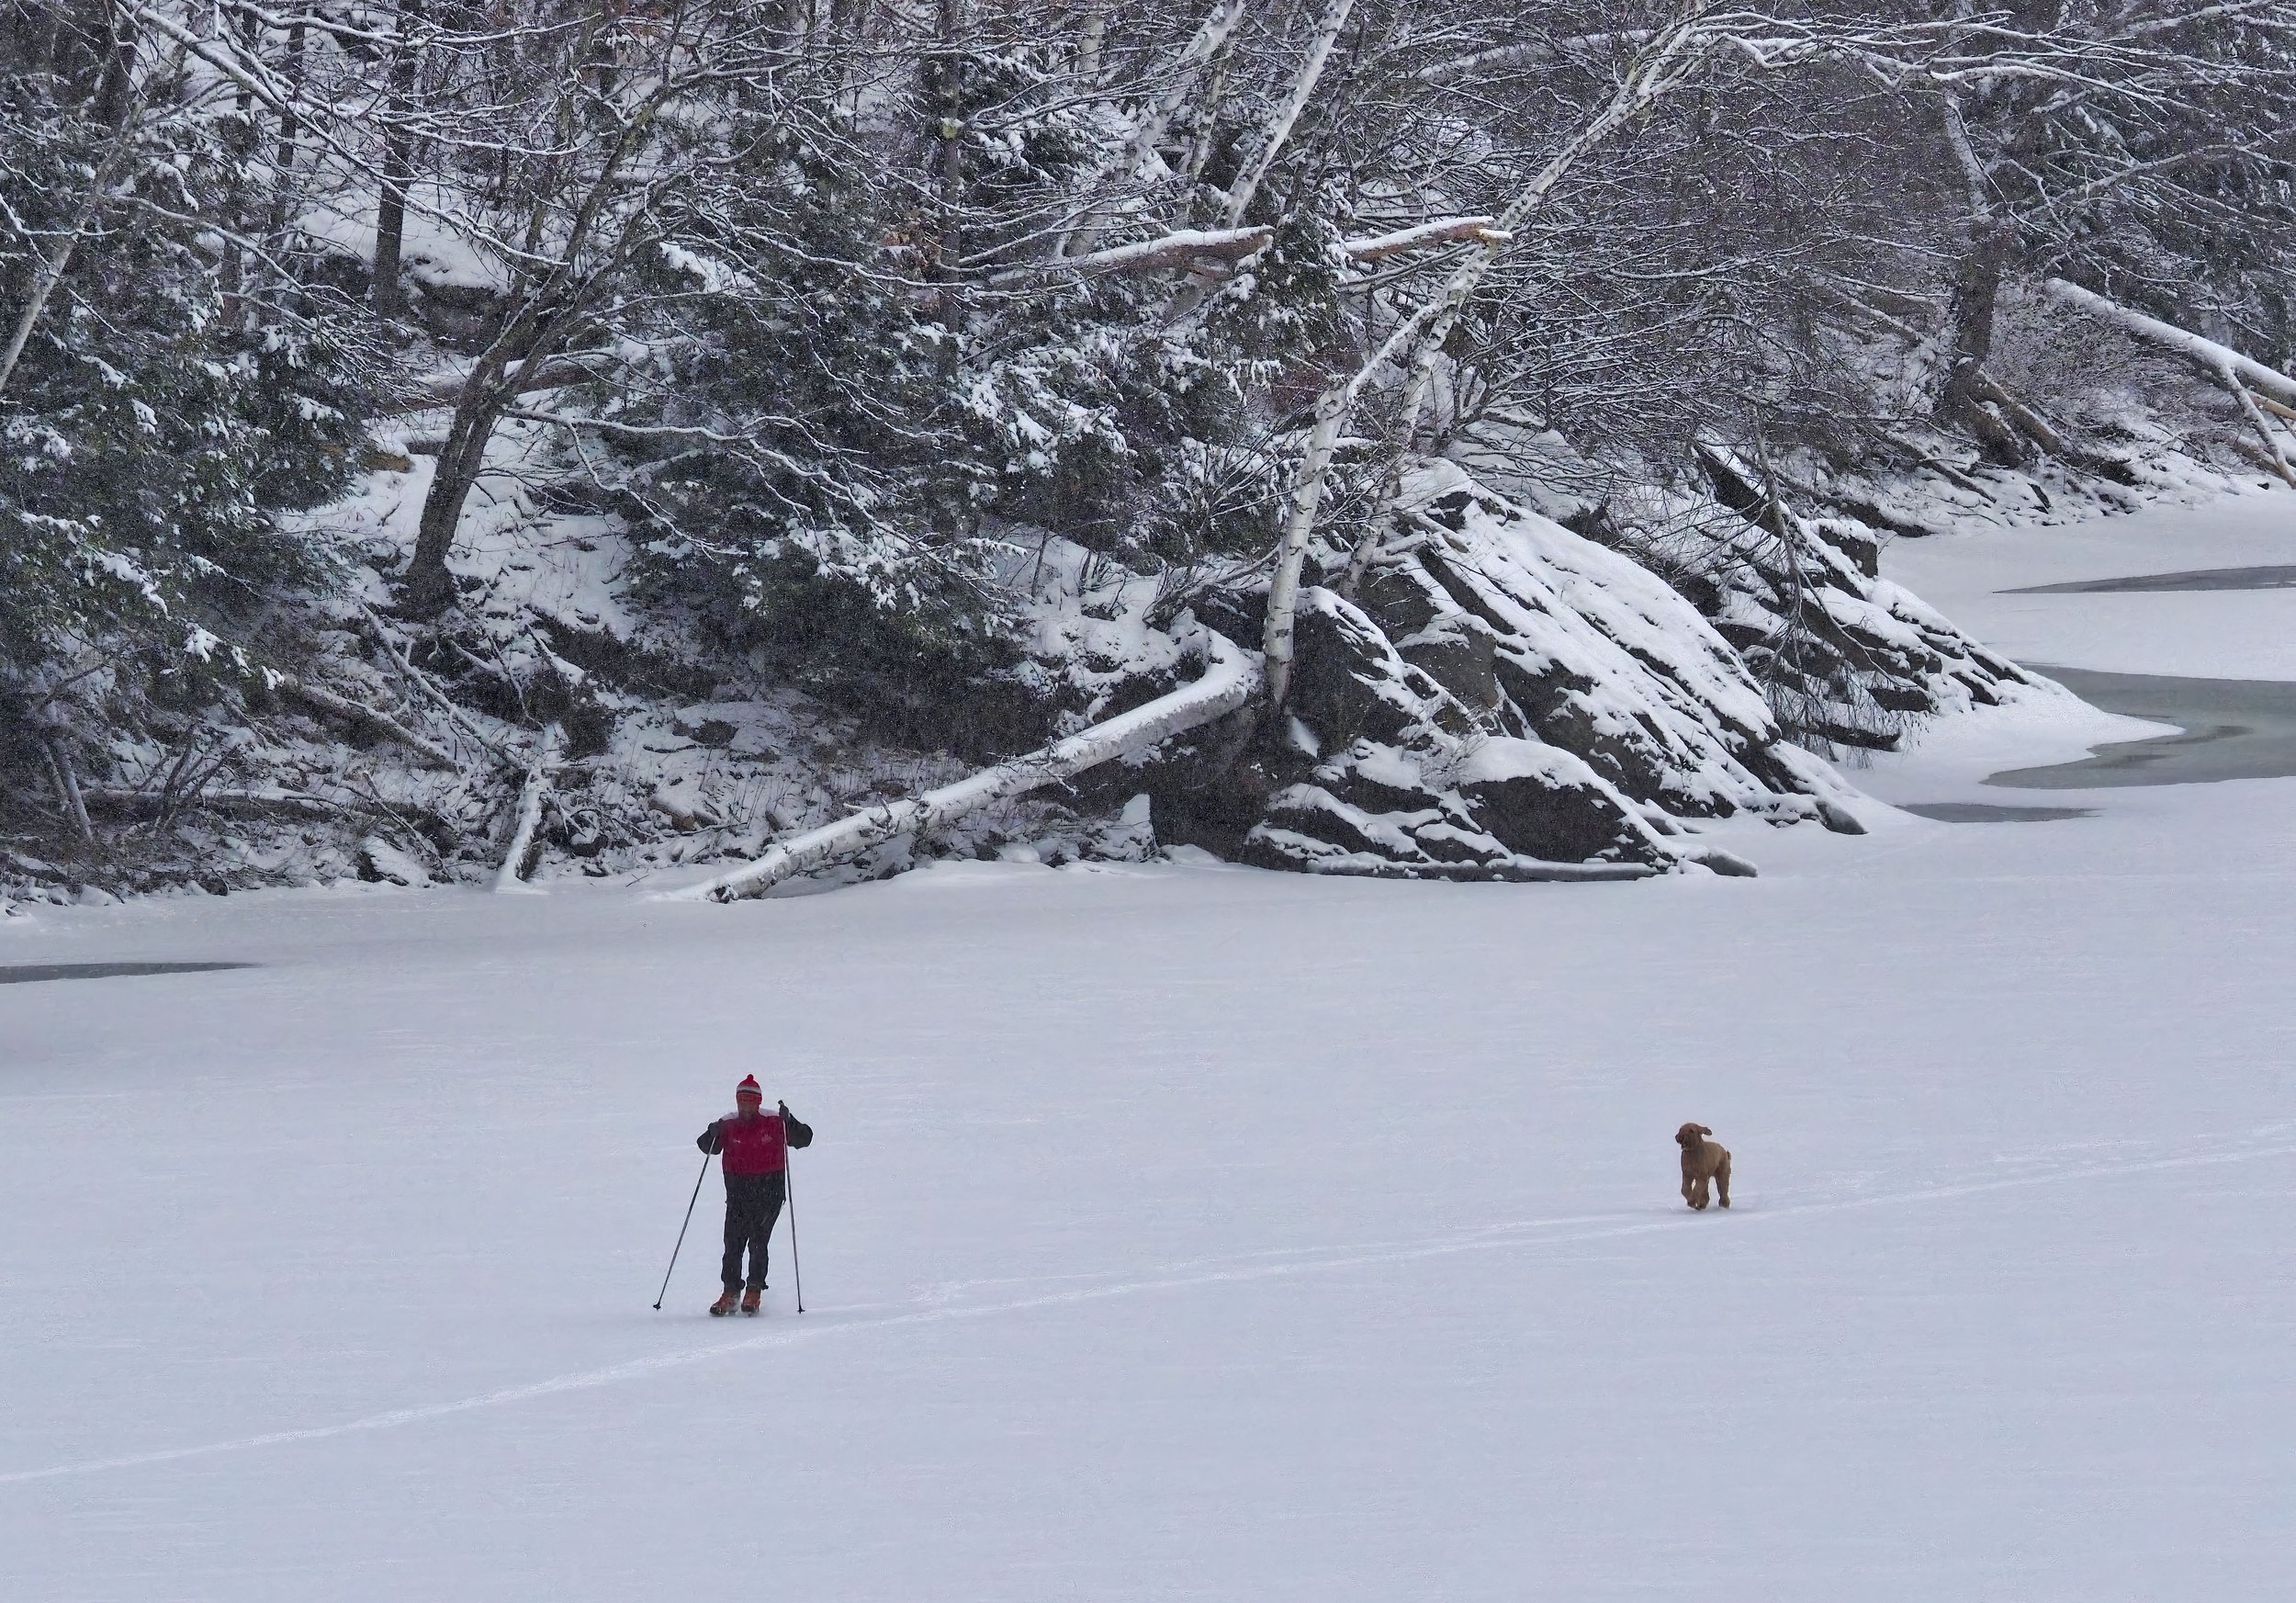  A lone skier and their dog on the Waterbury Reservoir. Photo by Gordon Miller  